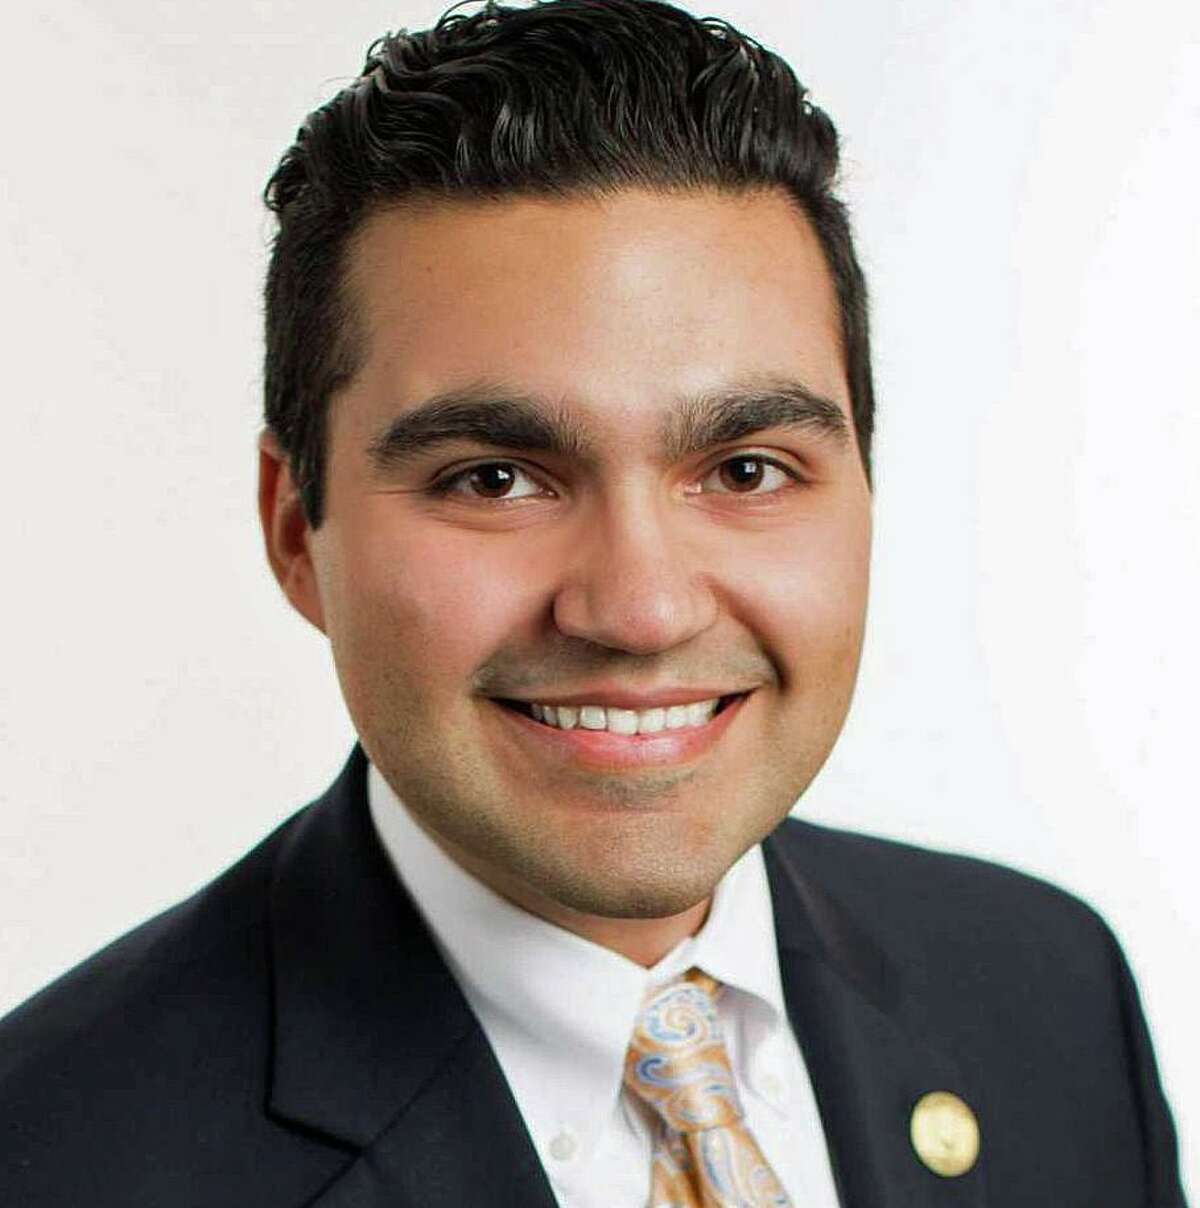 Nicholas Kapoor, a Democrat running for the 112th House seat representing Monroe and a portion of Newtown.